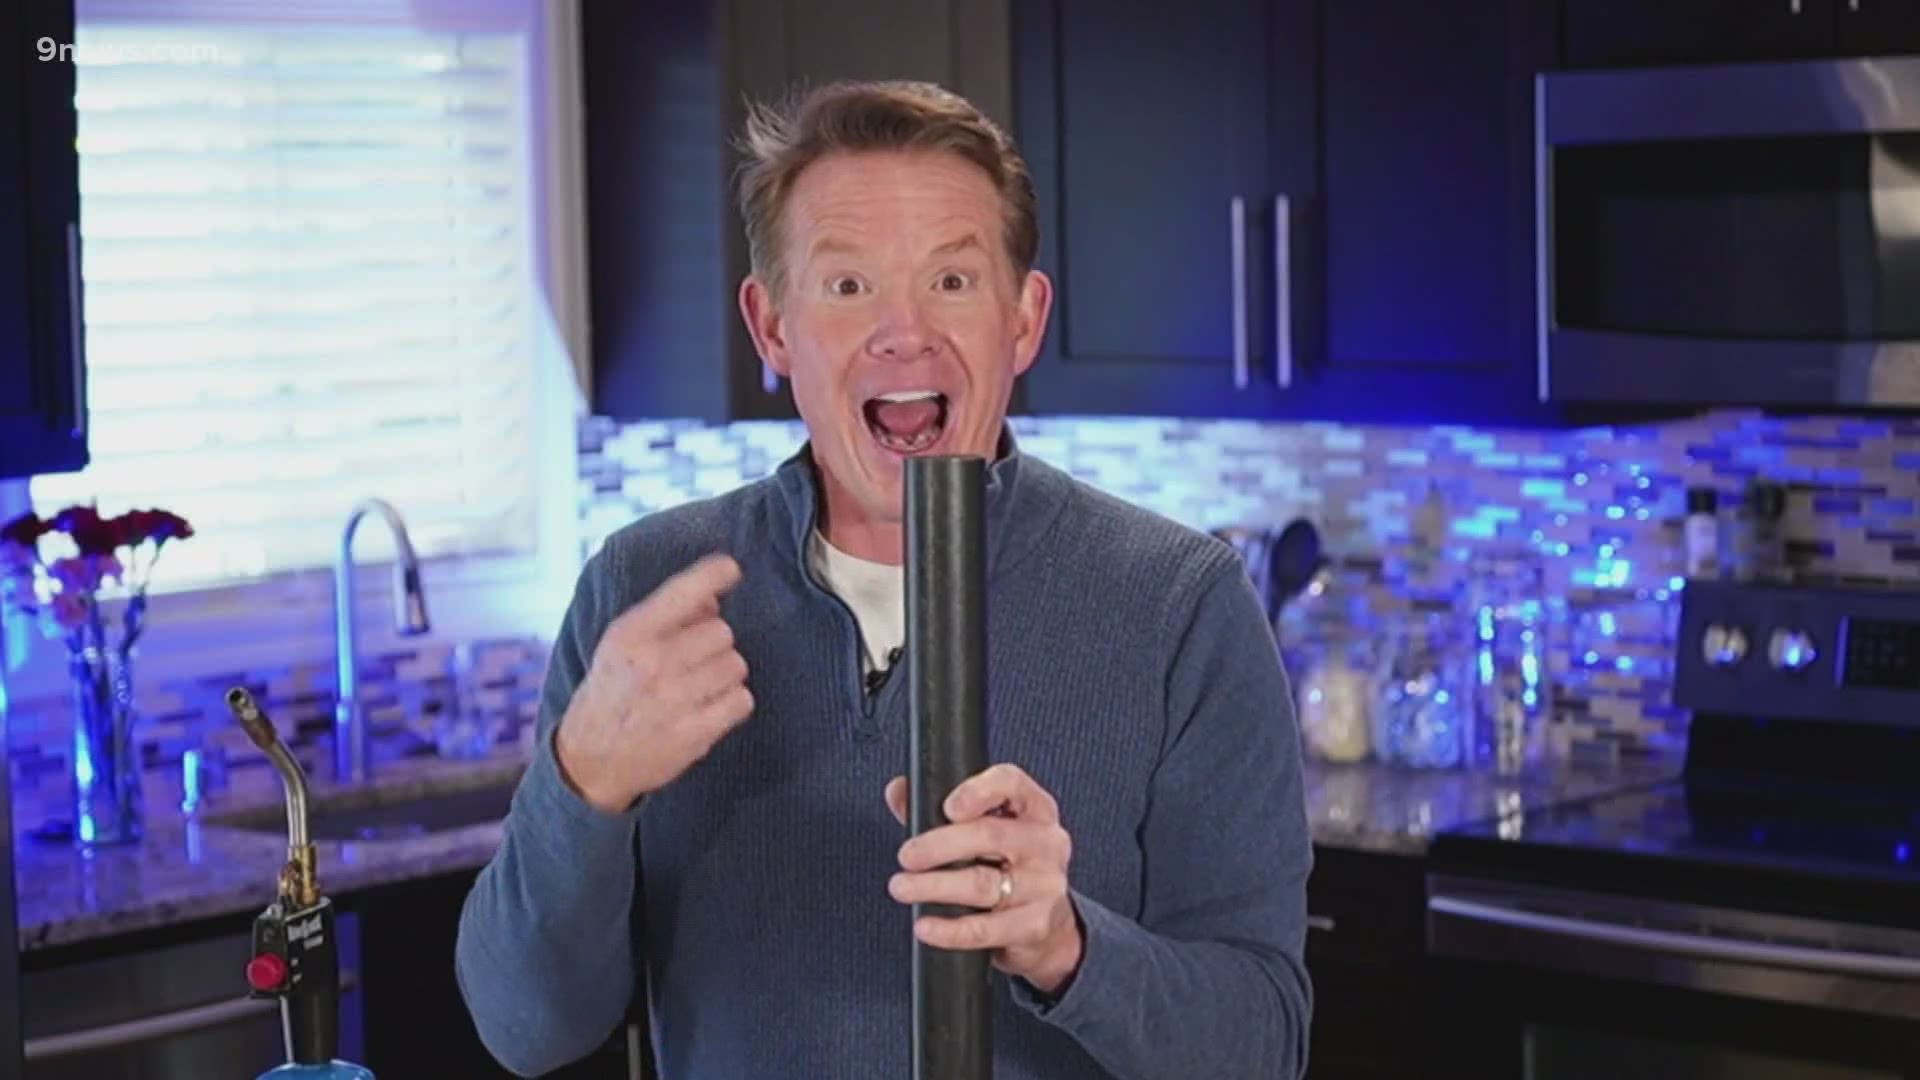 Heating a pipe with a blow torch isn't just a thing plumbers do, just ask our science guy Steve Spangler.